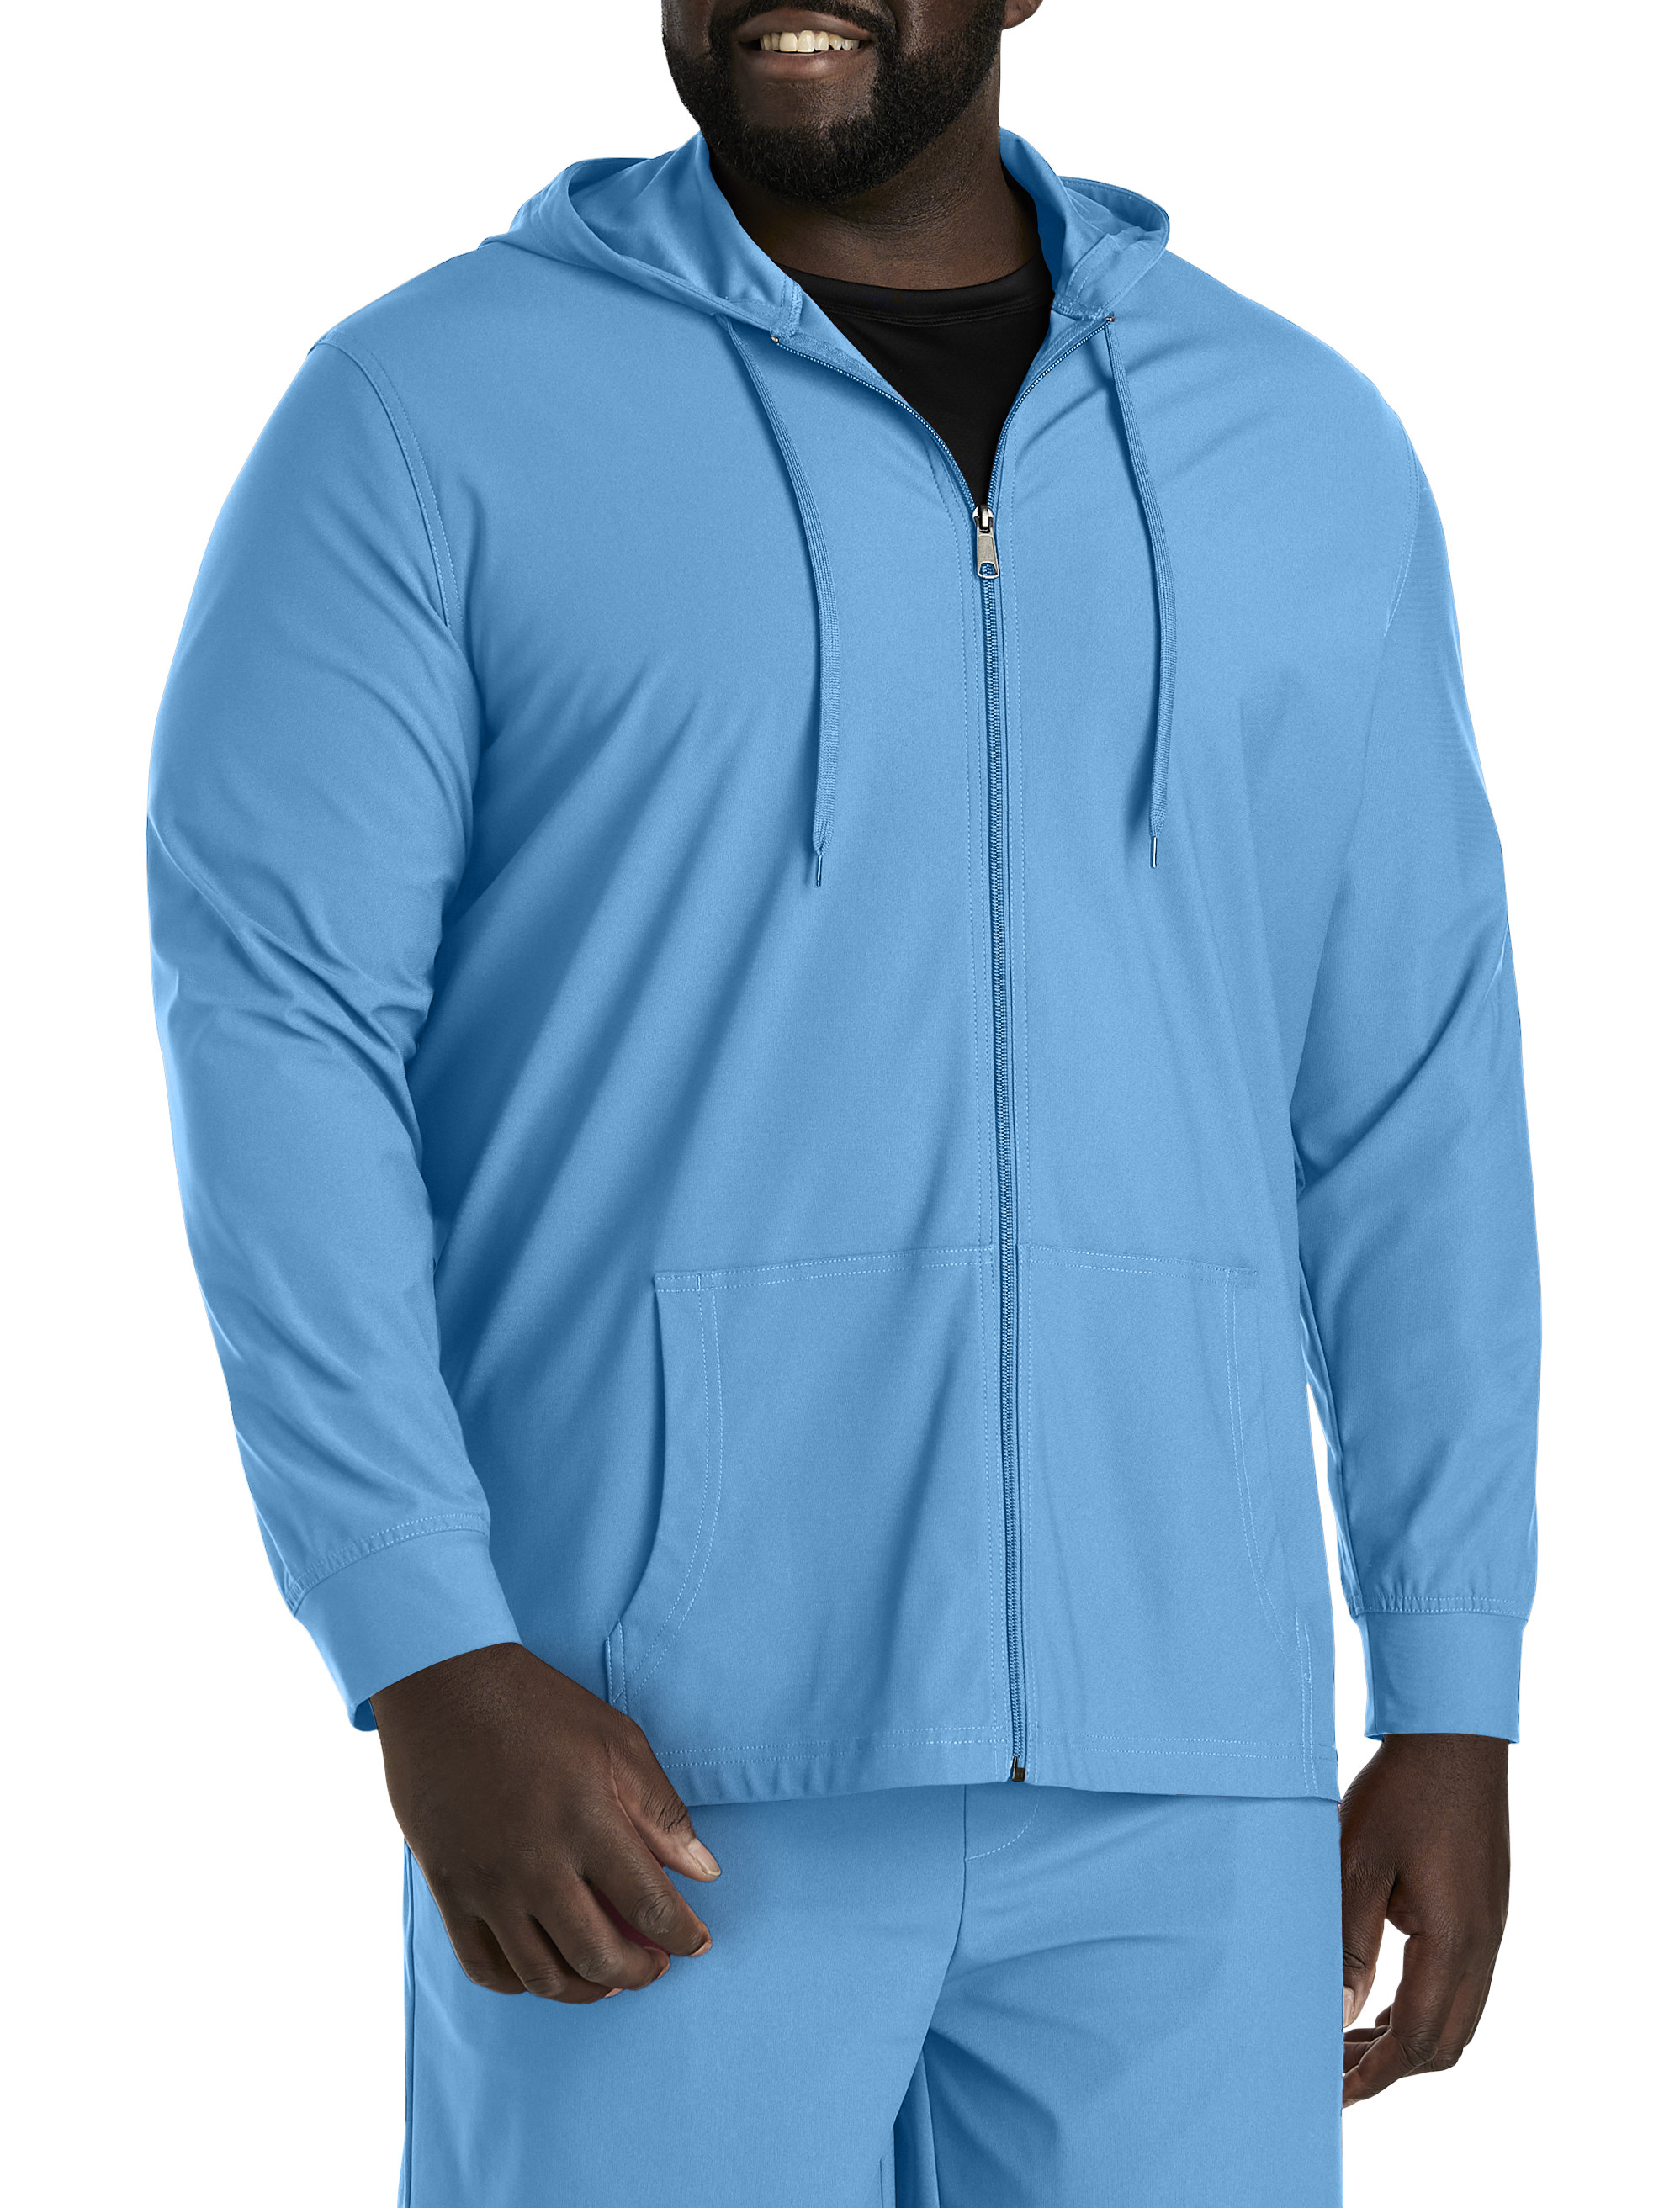 Big + Tall | Society of One Commuter Full-Zip Hoodie | DXL